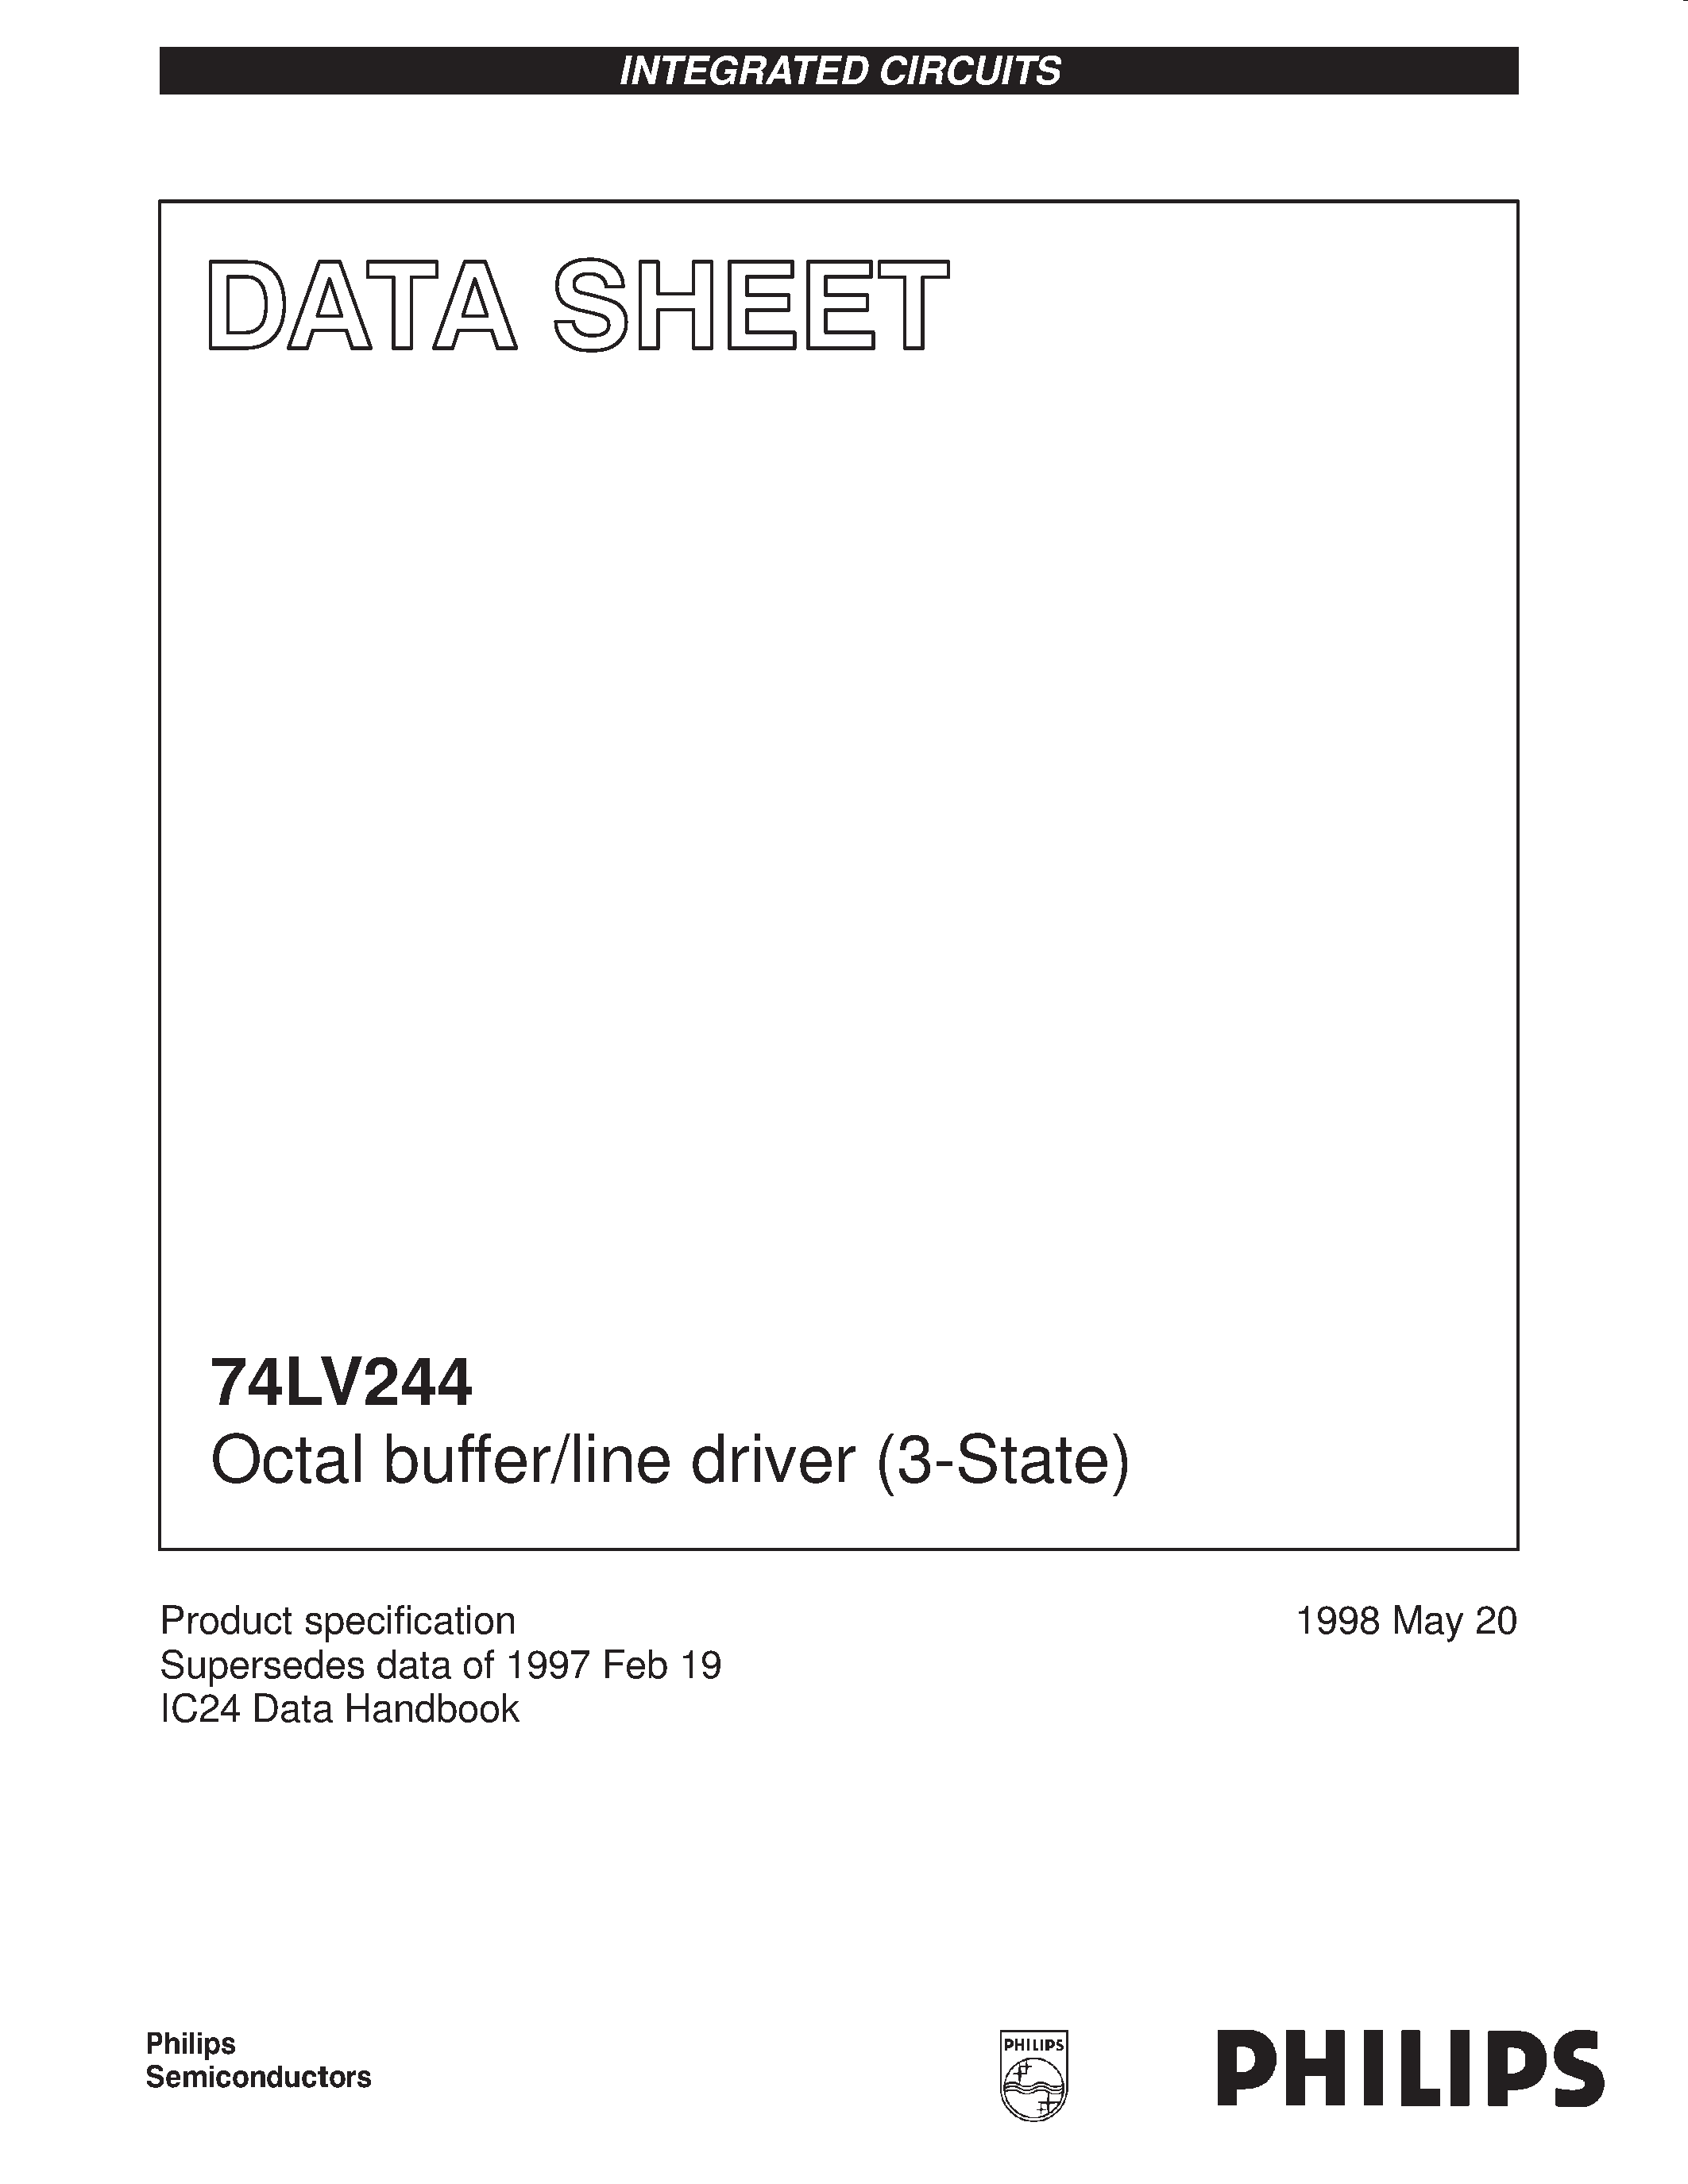 Datasheet 74LV244 - Octal buffer/line driver 3-State page 1